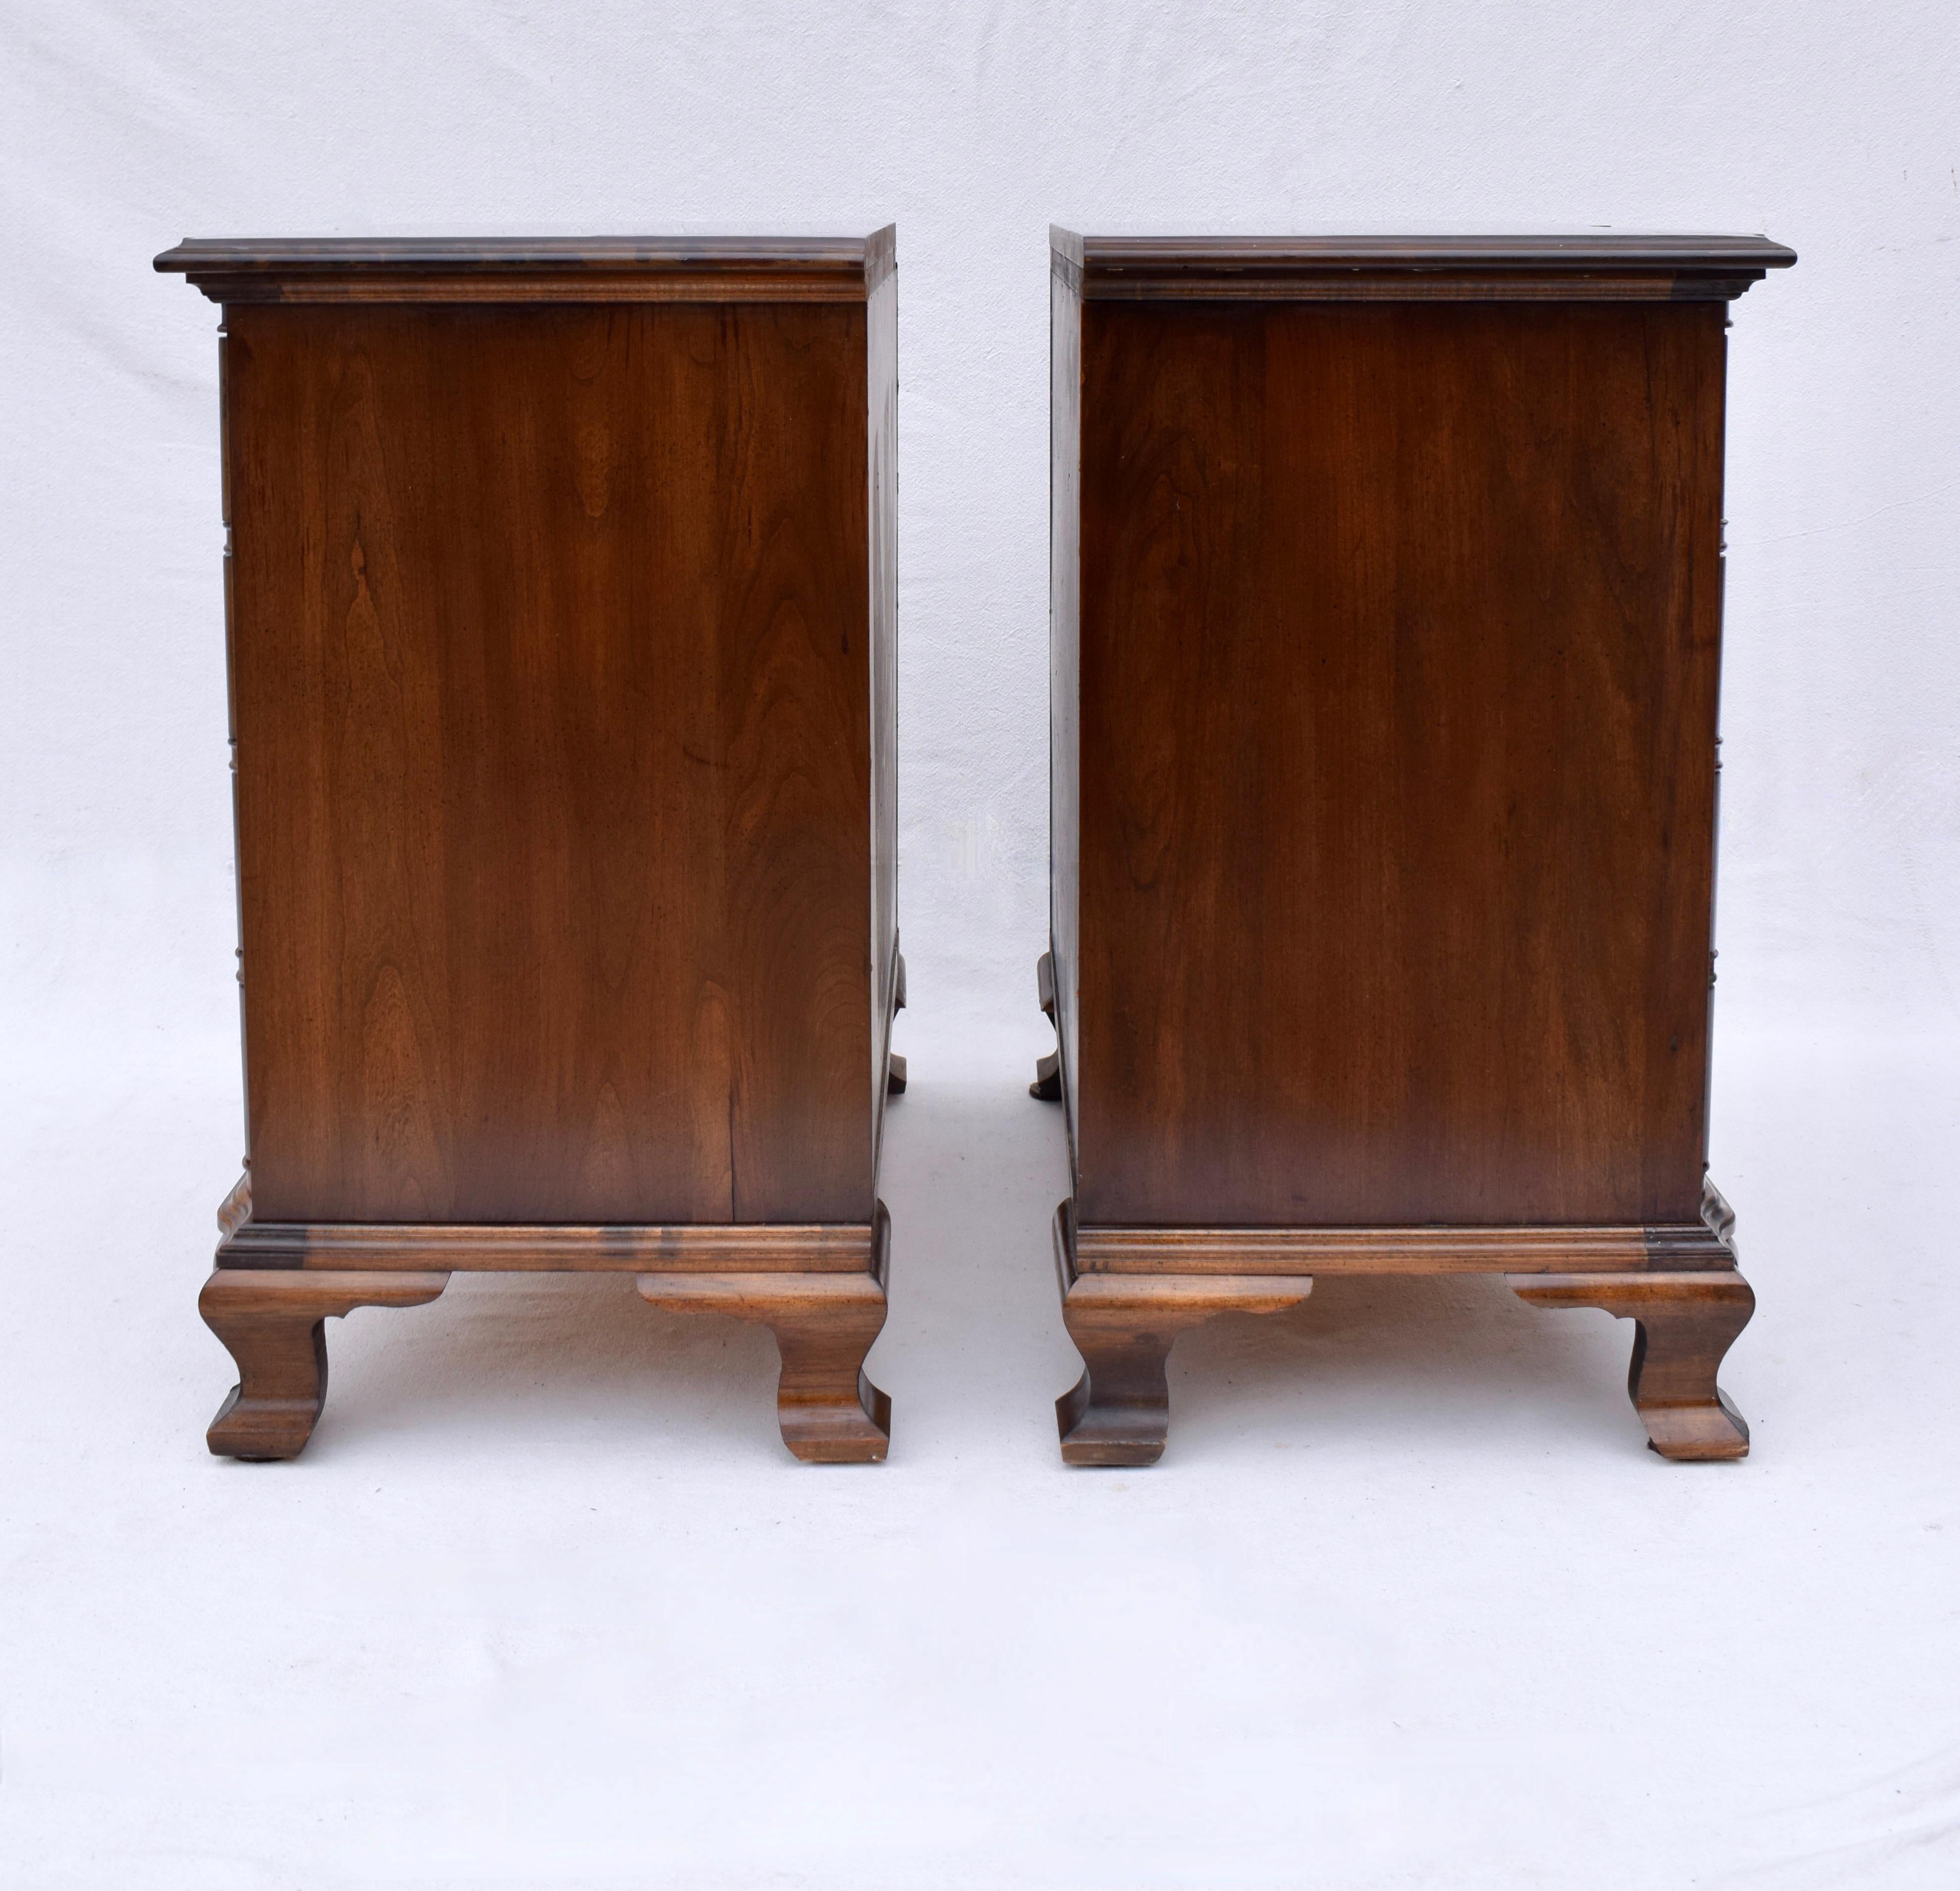 Vintage Georgian Goddard style Block Front Walnut Night Stands, a Pair For Sale 3